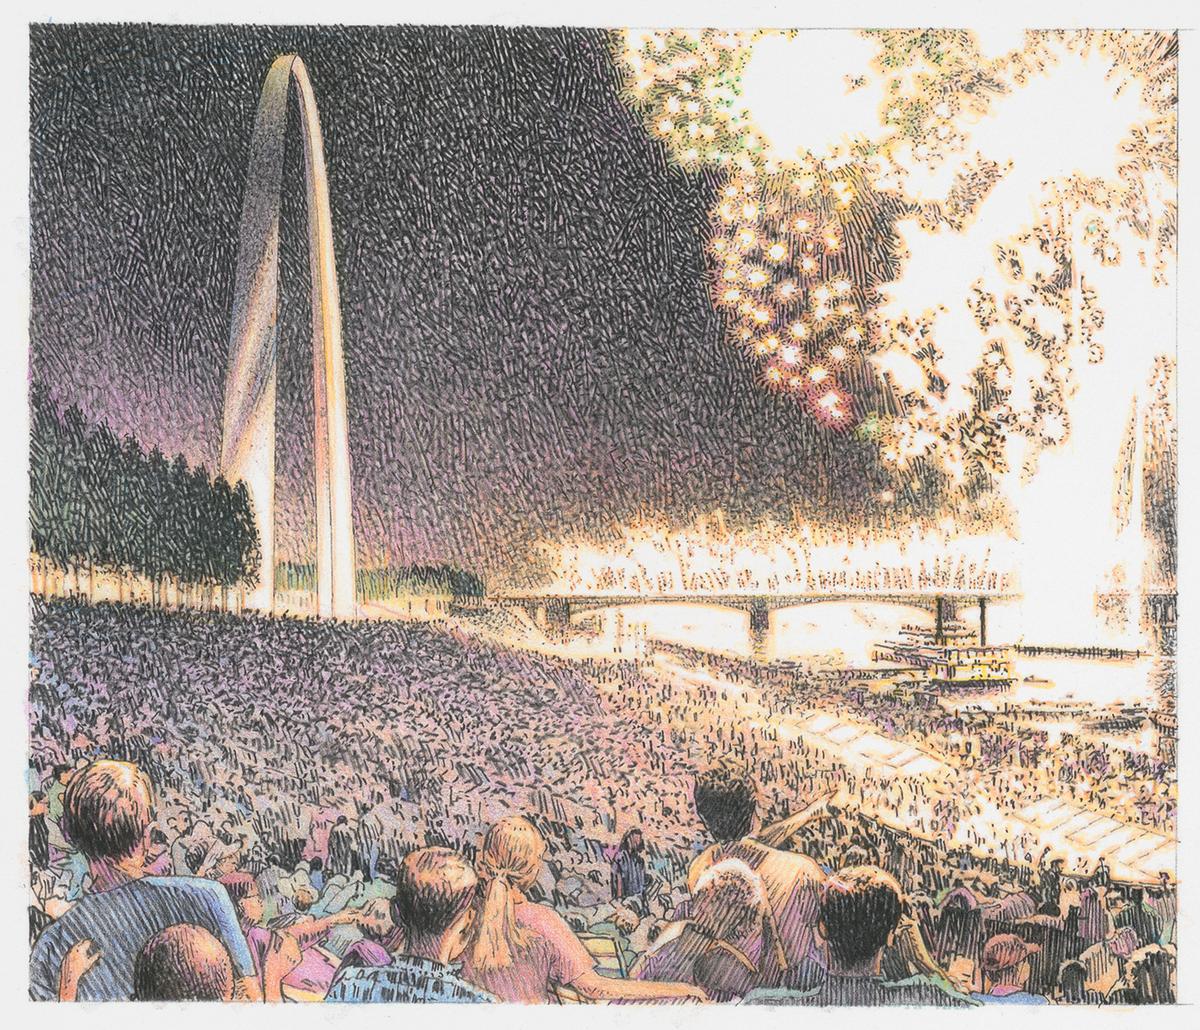 Design drawing for the Jefferson National Expansion Memorial Competition showing crowd watching fireworks near the Gateway Arch, St. Louis, Missouri. Library of Congress. (Public Domain)